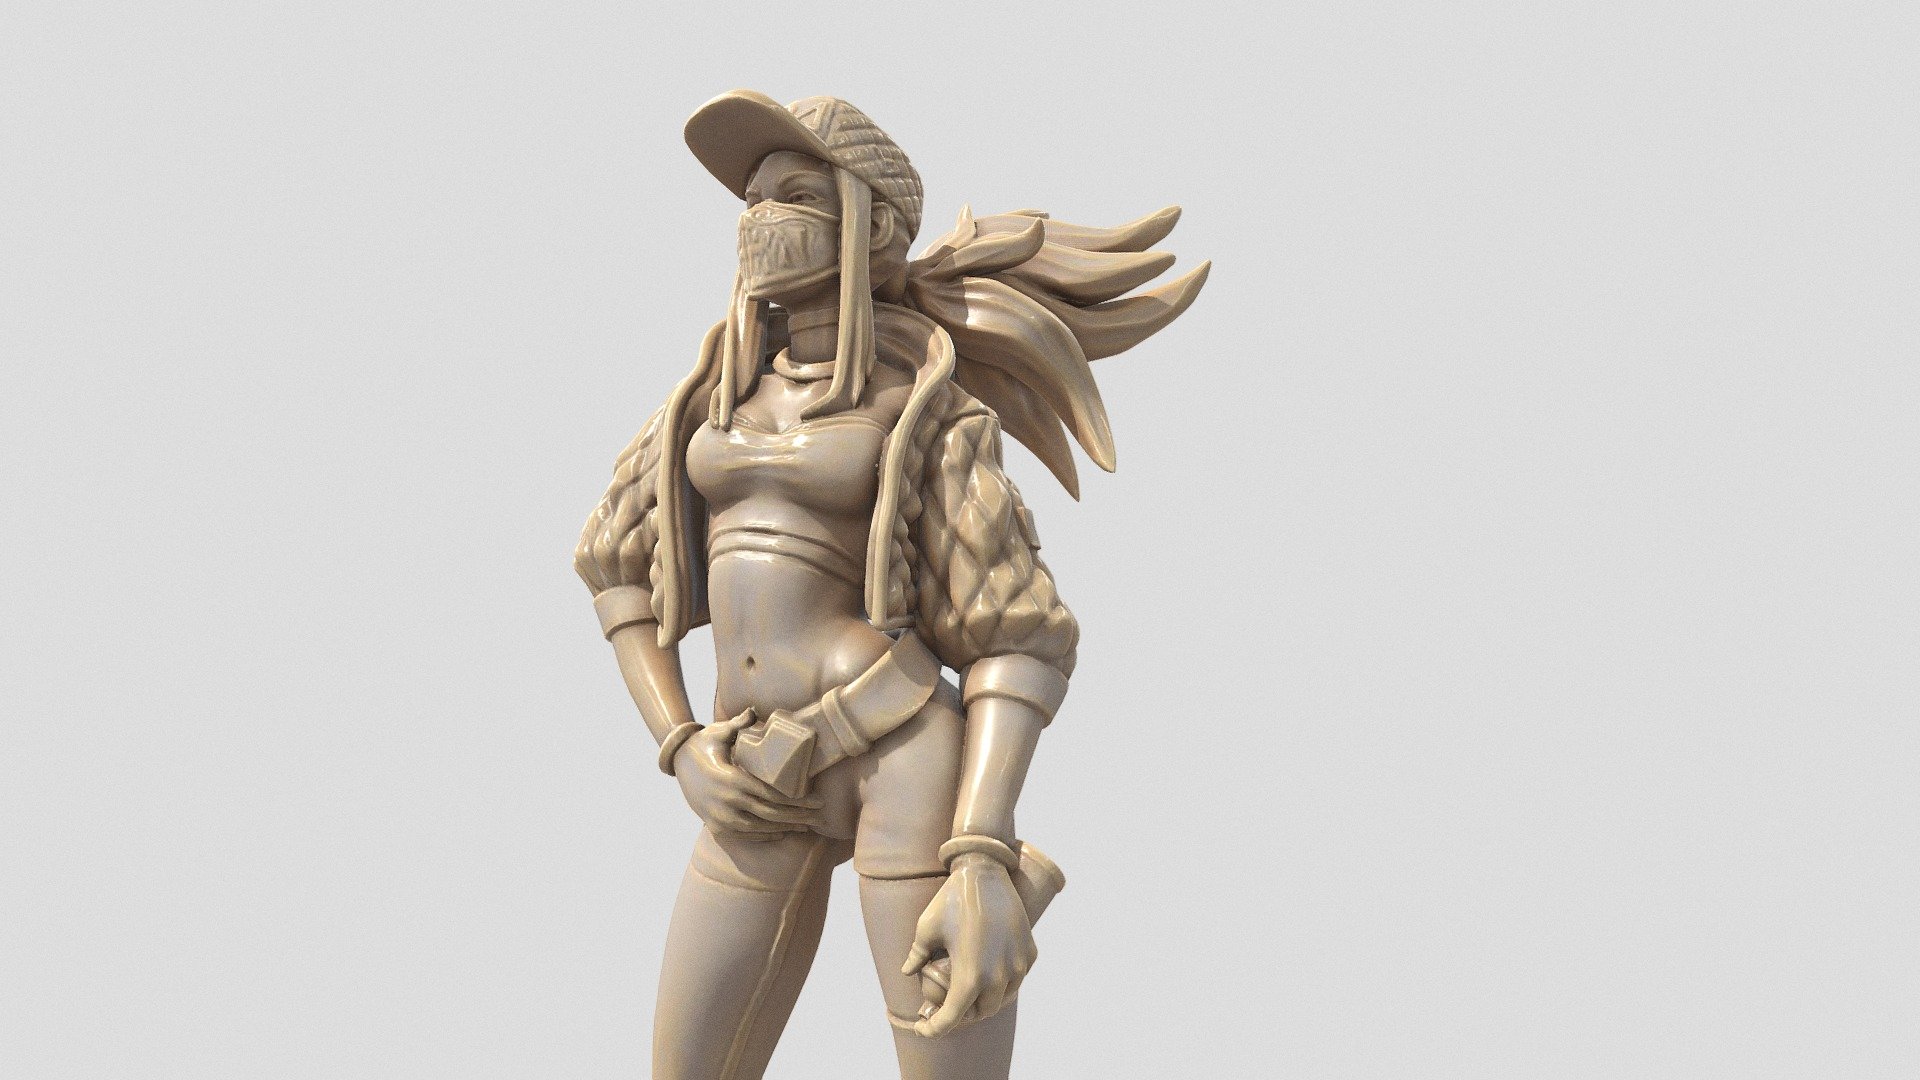 For 3d Printable version go here
https://thangs.com/designer/printedobsession/3d-model/KDA%20Akali%20-%20LEAGUE%20OF%20LEGENDS%20-%2030%20cm%20model.%20-57364?manualModelView=true 

Akali makes appearances next to other street performers in cities she is visiting. Combining mixed martial arts and the beat of her own rap lyrics, she delights audiences with her bold lyrical rap and punk ninja style 3d model